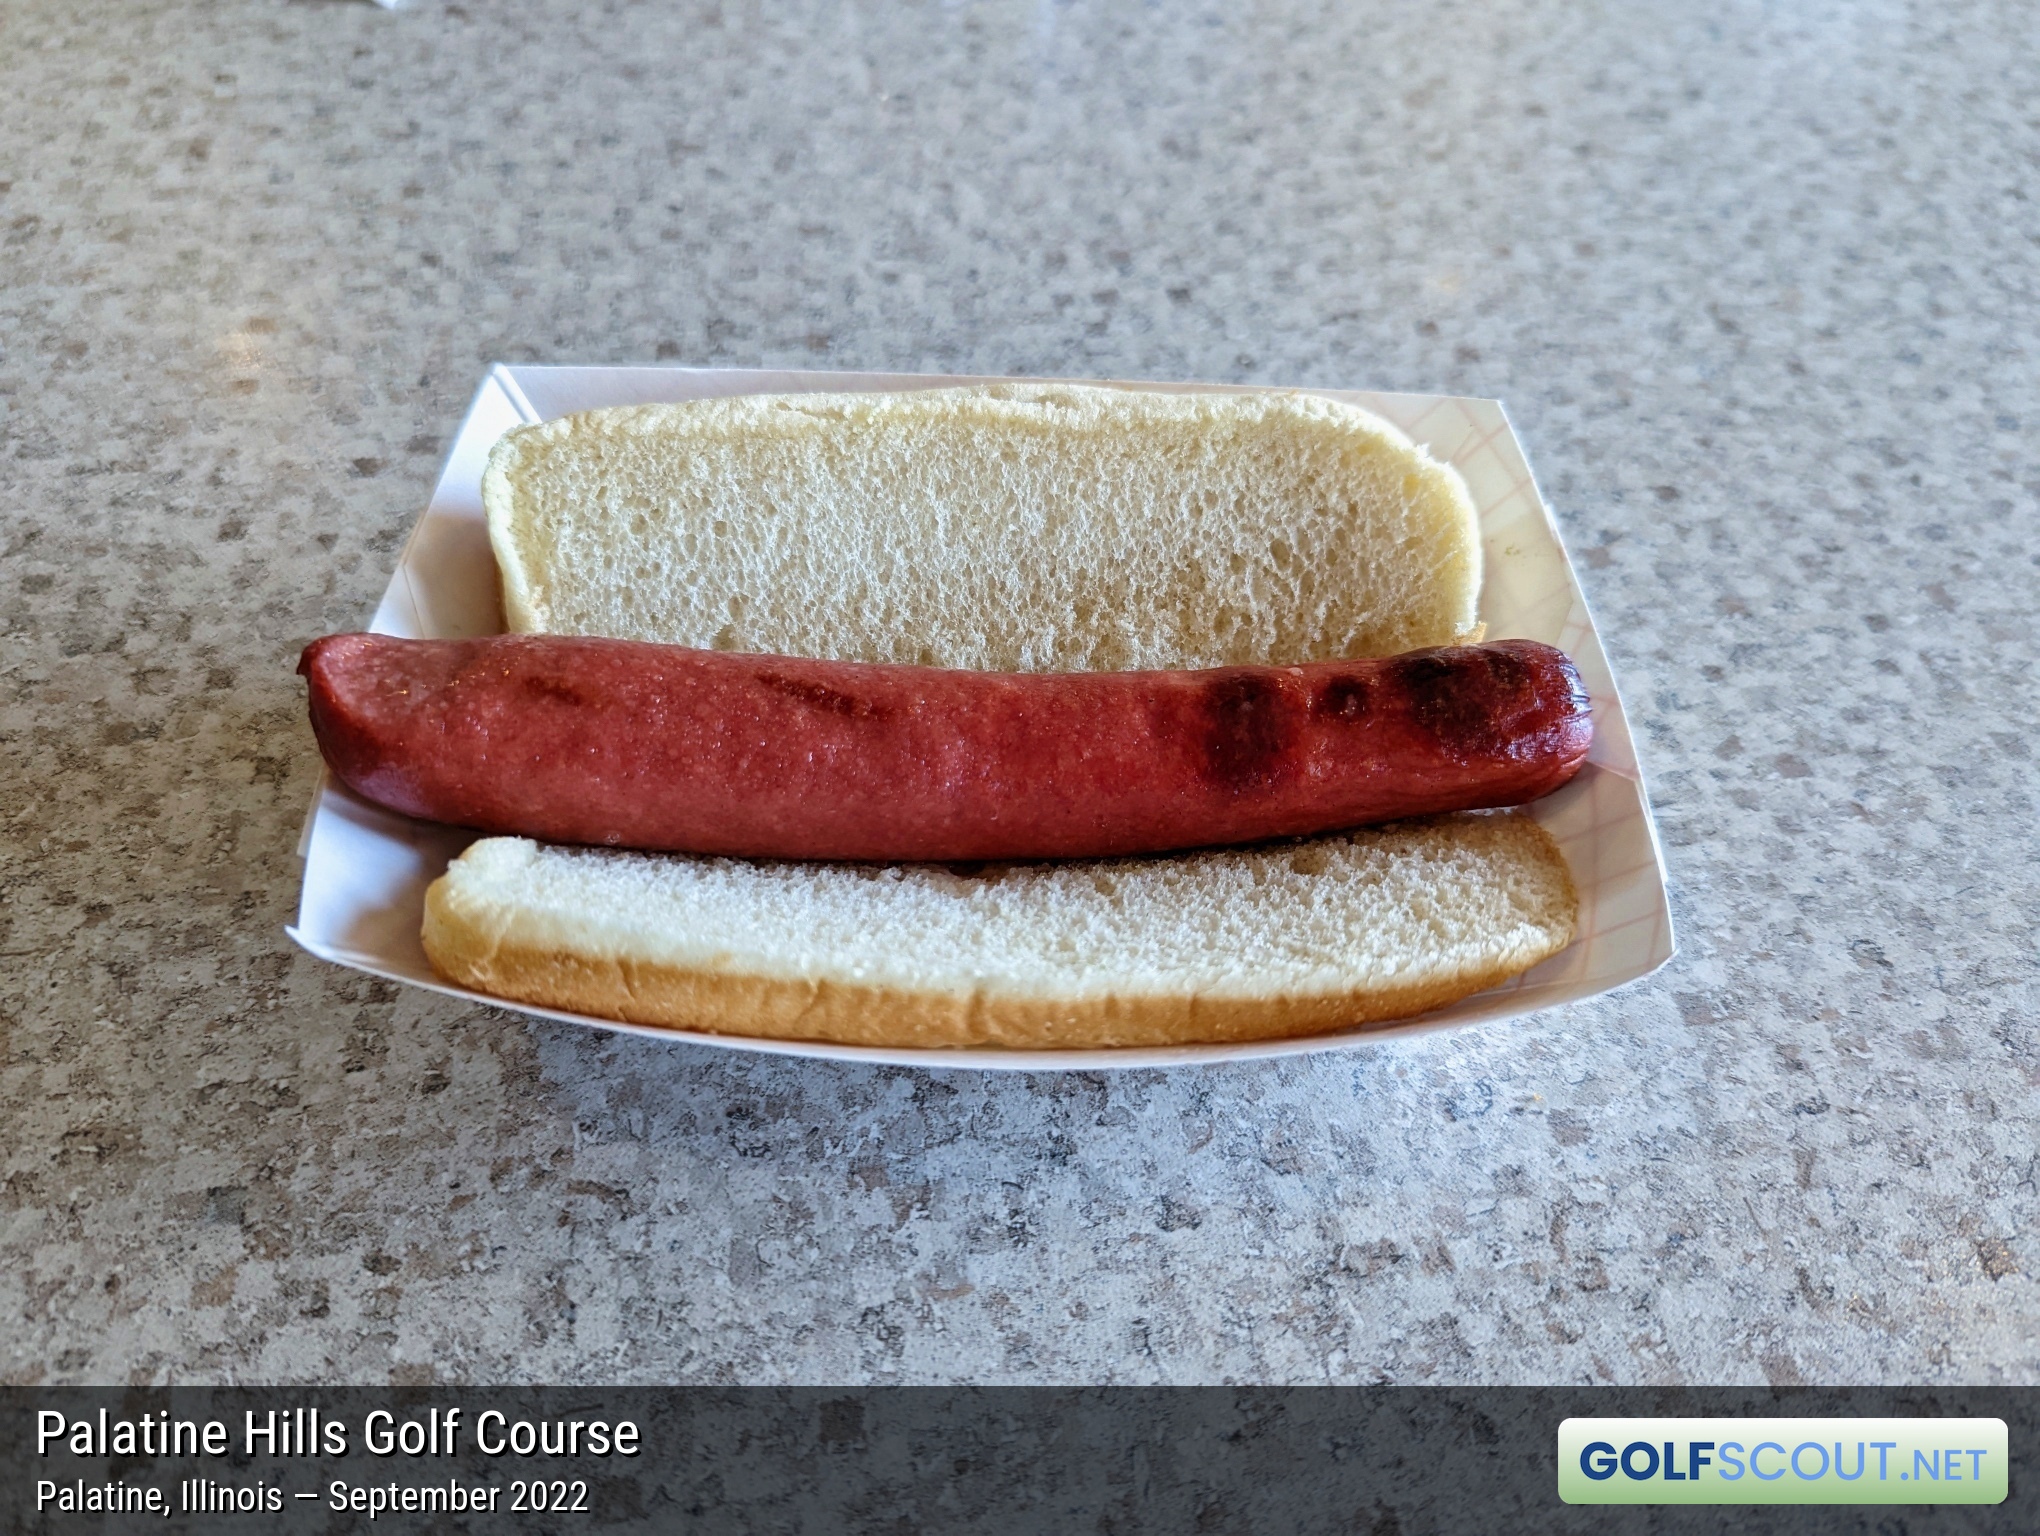 Photo of the food and dining at Palatine Hills Golf Course in Palatine, Illinois. Photo of the hot dog at Palatine Hills Golf Course in Palatine, Illinois.